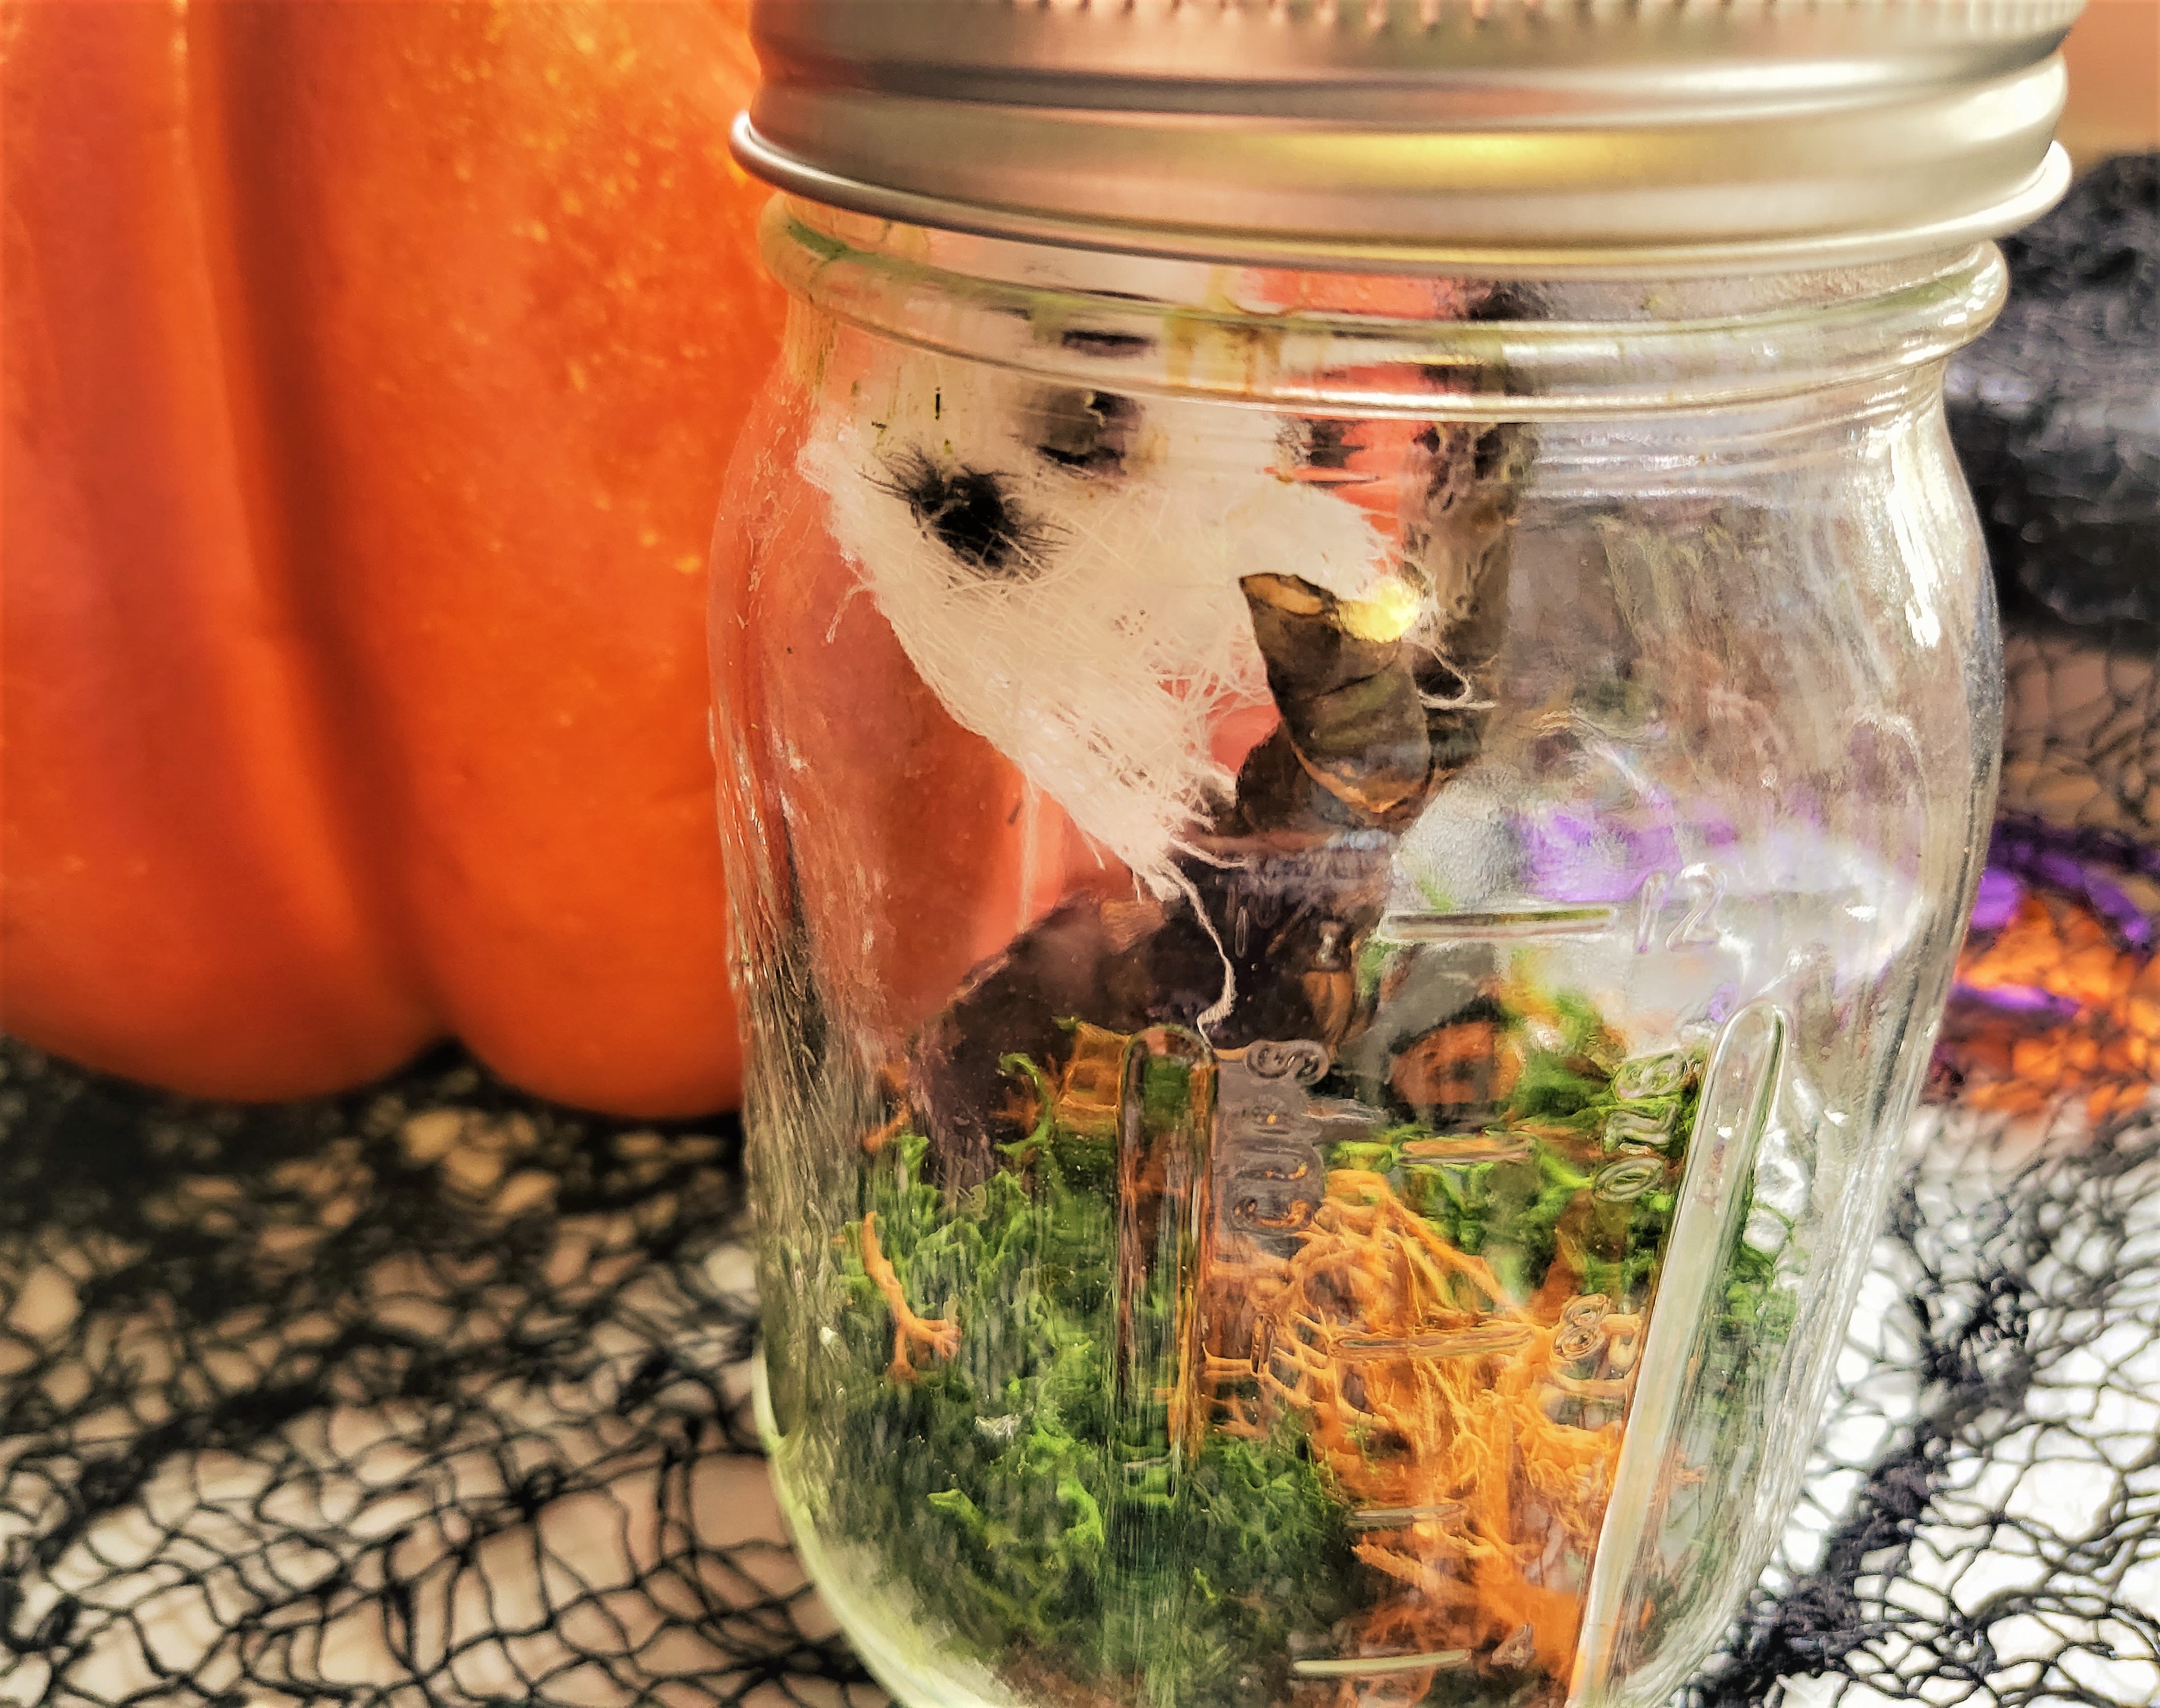 Image of a cemetery-themed terrarium in a mason jar, including a ghost, trees, grass, and tombstones